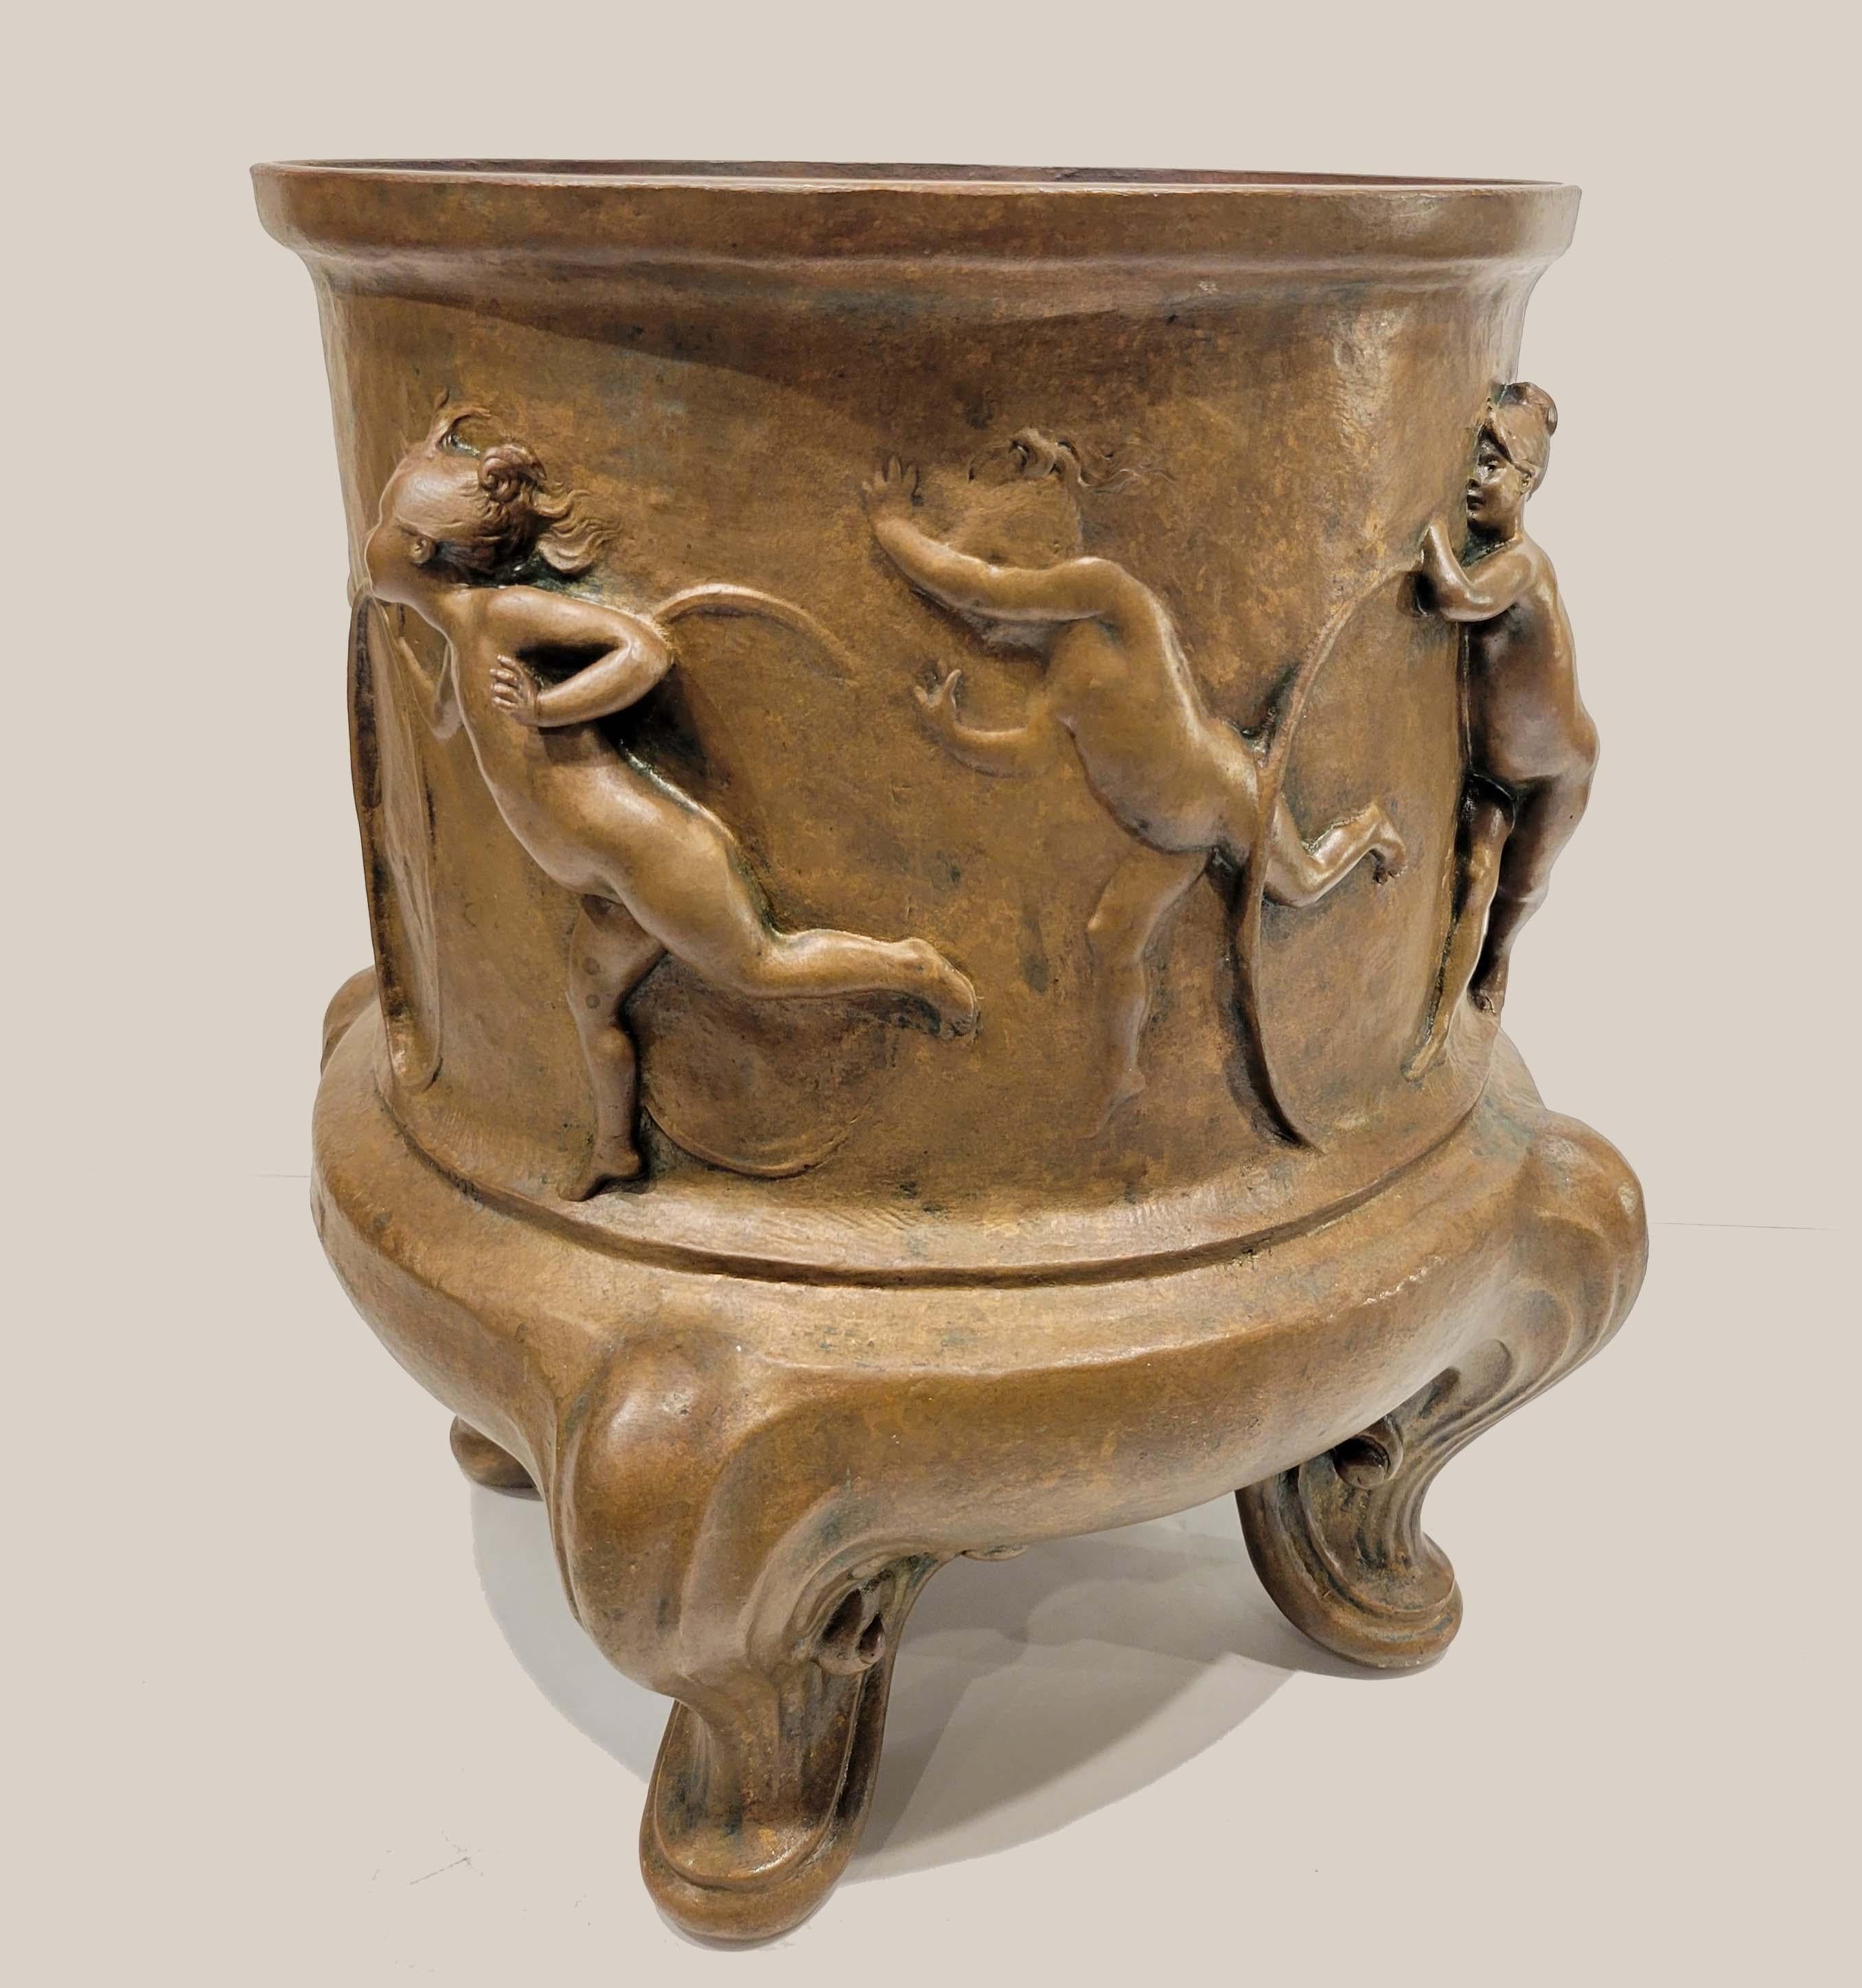 Inscribed Joseph Cheret and E. SOLEAU Edits PARIS.
Cast by the famous Paris foundry of Eugene Soleau, this outstanding sculptural Cachepot features a picturesque group of puttee playing with large rings.

Joseph Gustave Chéret (1838-1894) was a